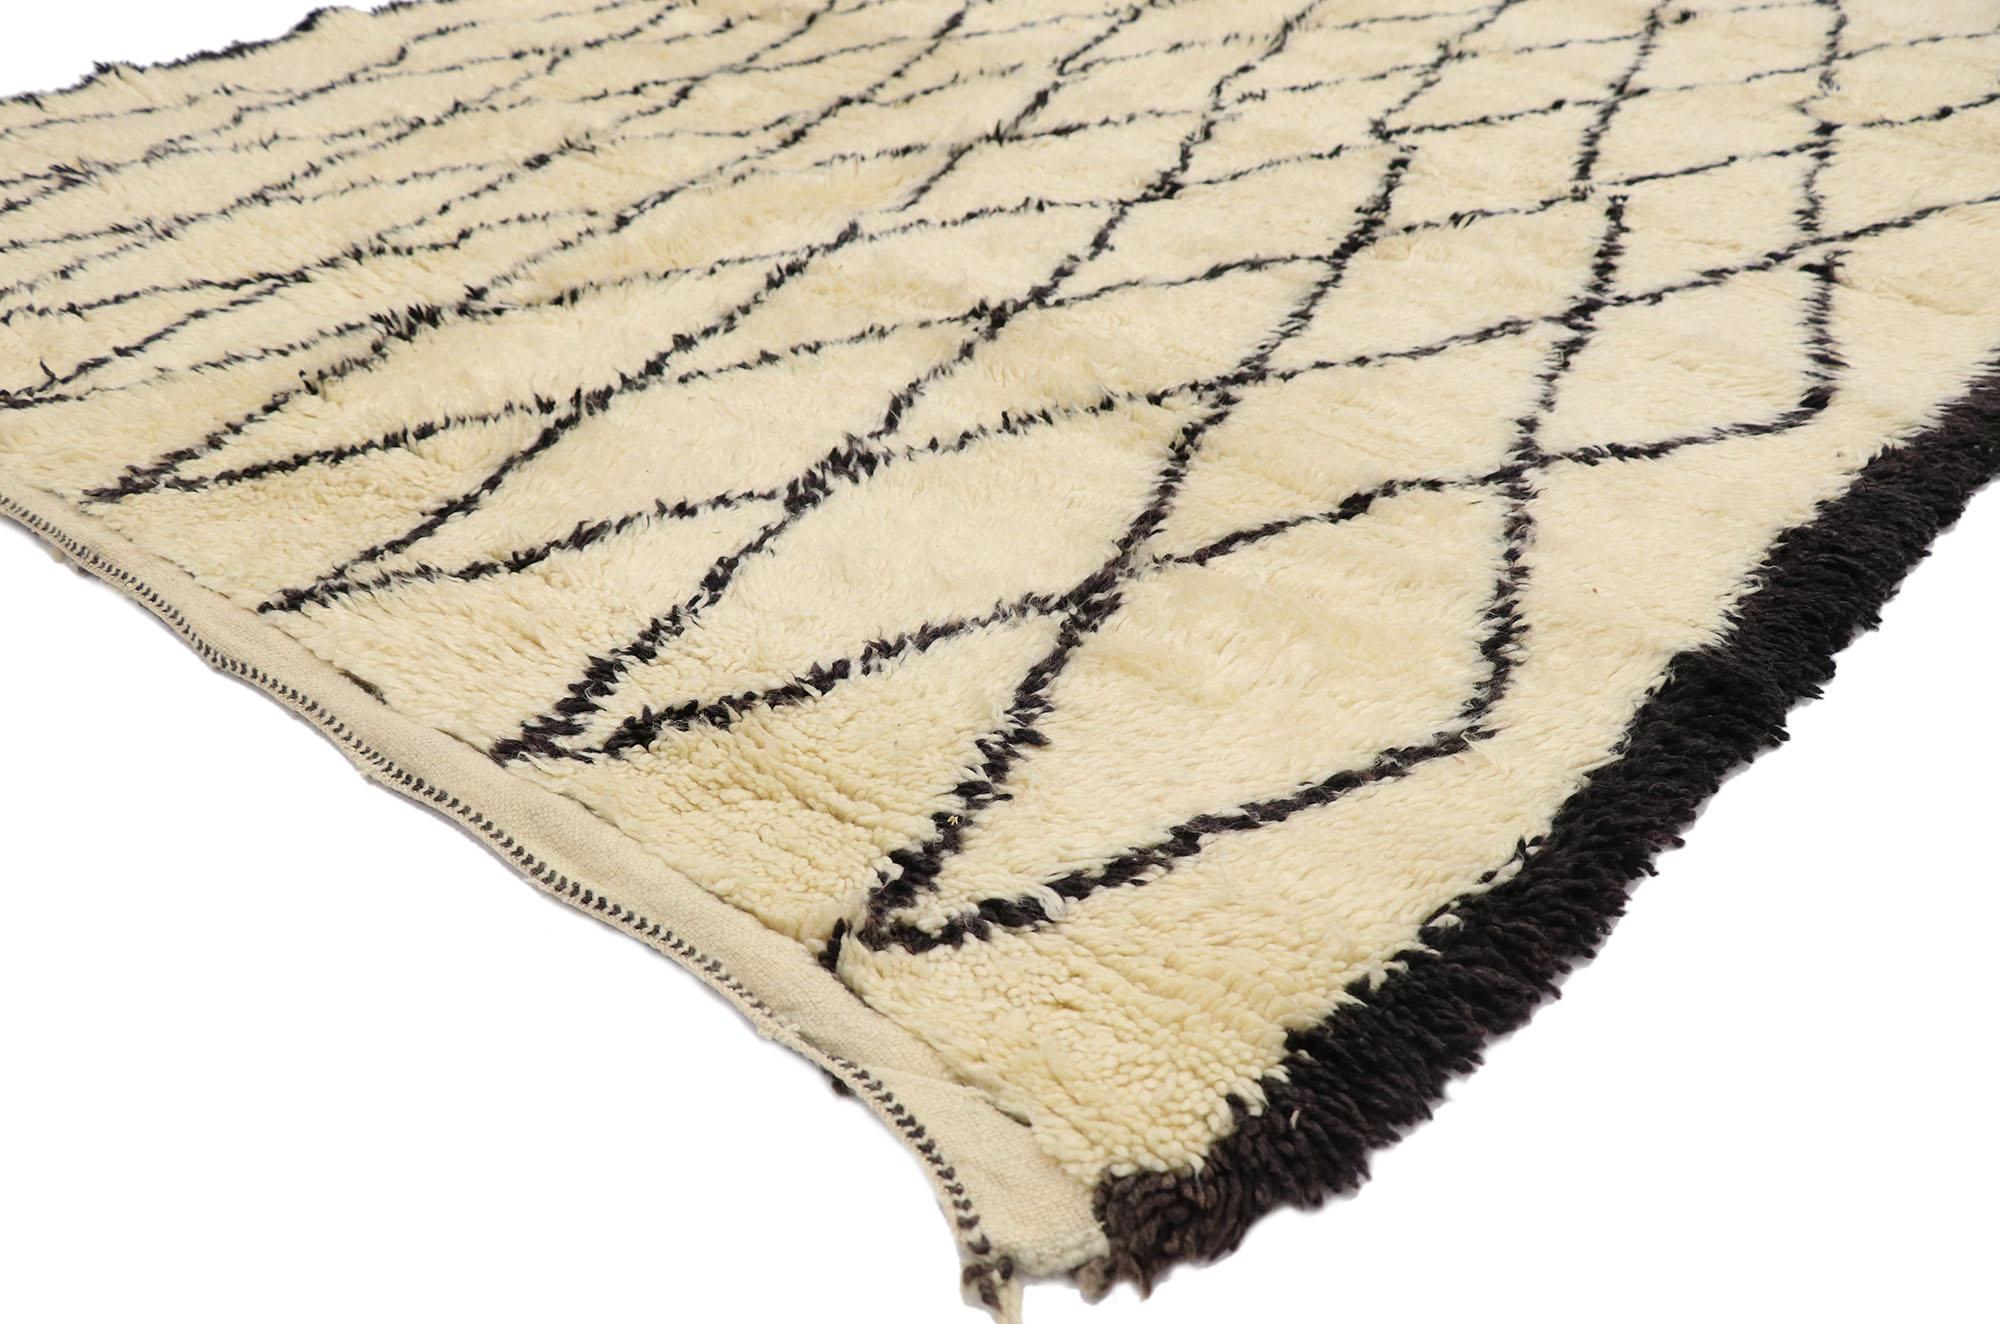 21349 Vintage Beni Ourain Moroccan Rug, 06'05 x 07'04.
Wabi-Sabi meets Shibui in this hand knotted wool vintage Moroccan Beni Ourain rug. The perfectly imperfect lattice design and neutral earthy colors woven into this piece work together to